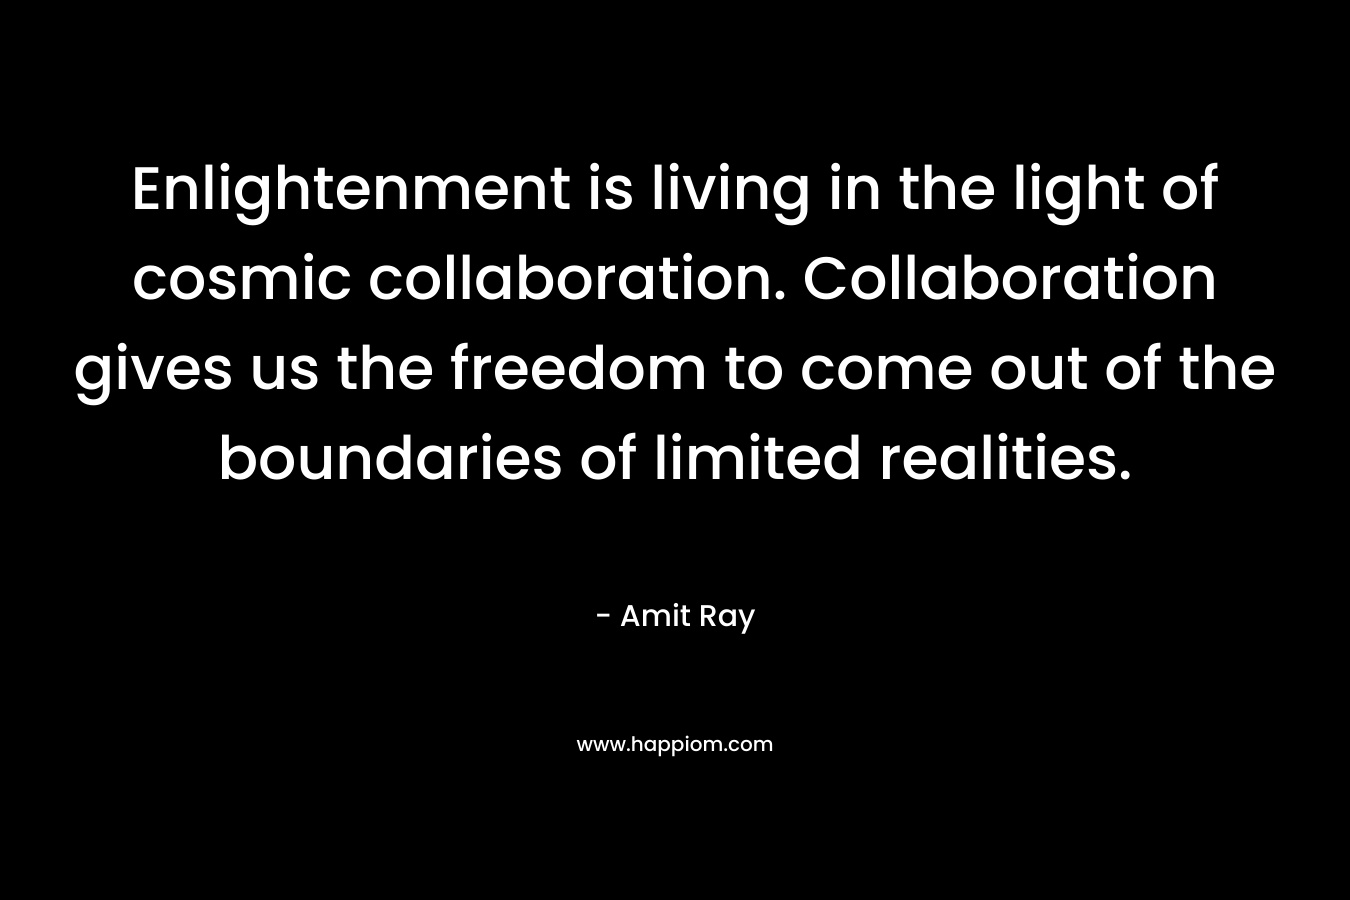 Enlightenment is living in the light of cosmic collaboration. Collaboration gives us the freedom to come out of the boundaries of limited realities.